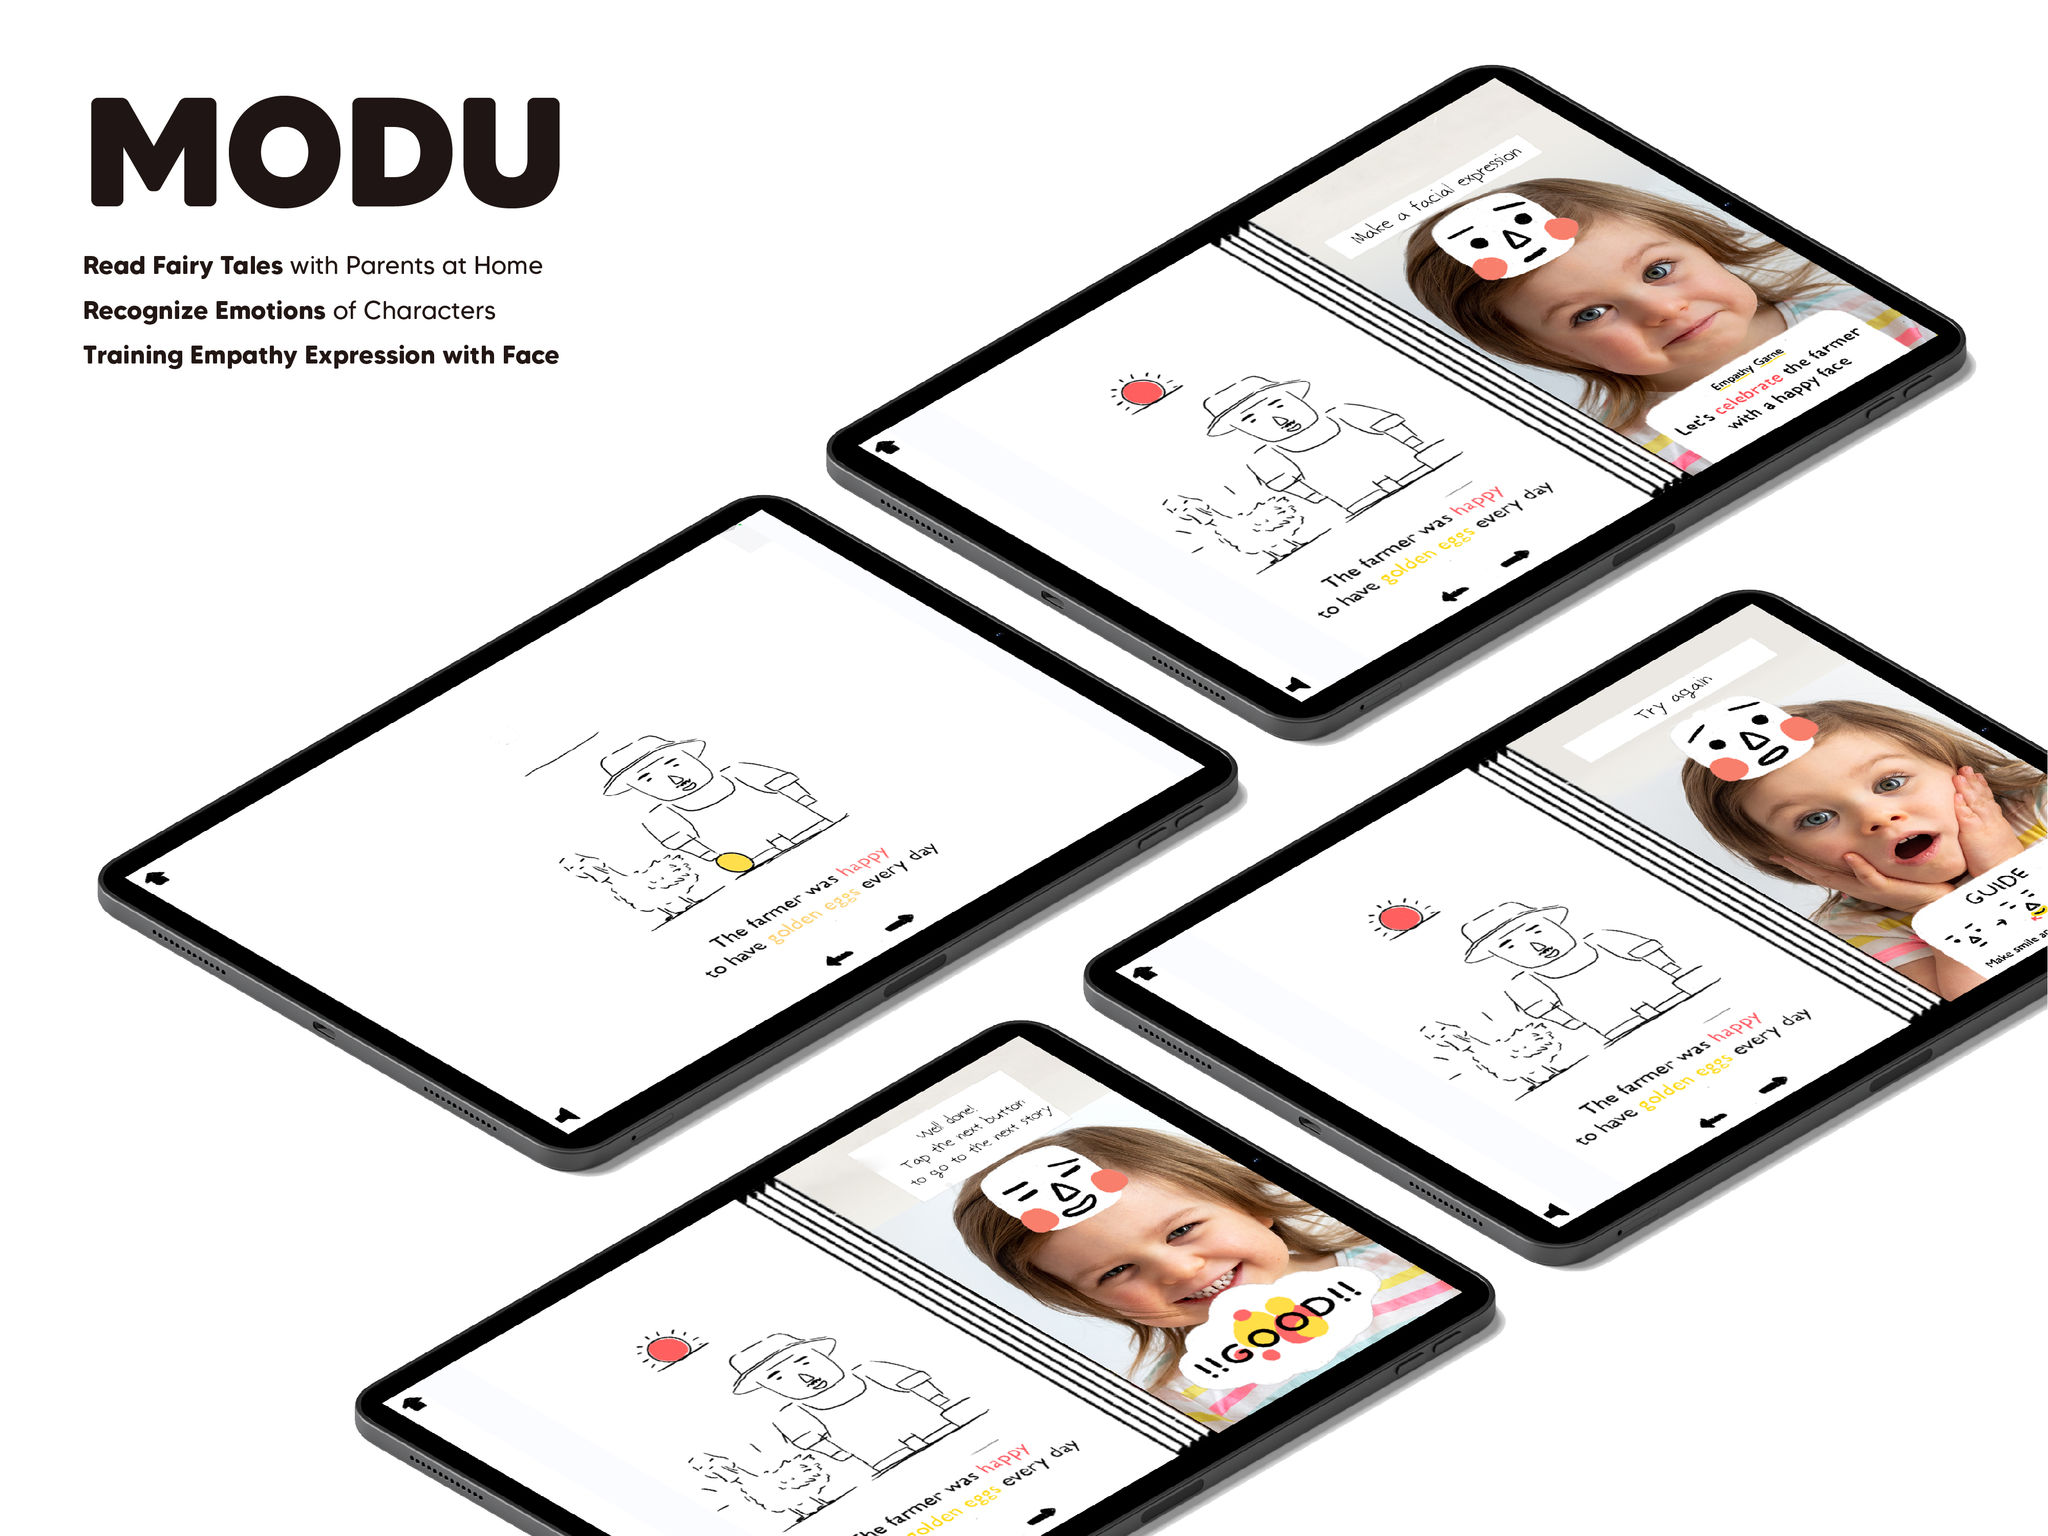 MODU: A Story-Based Empathy Expression Training Game